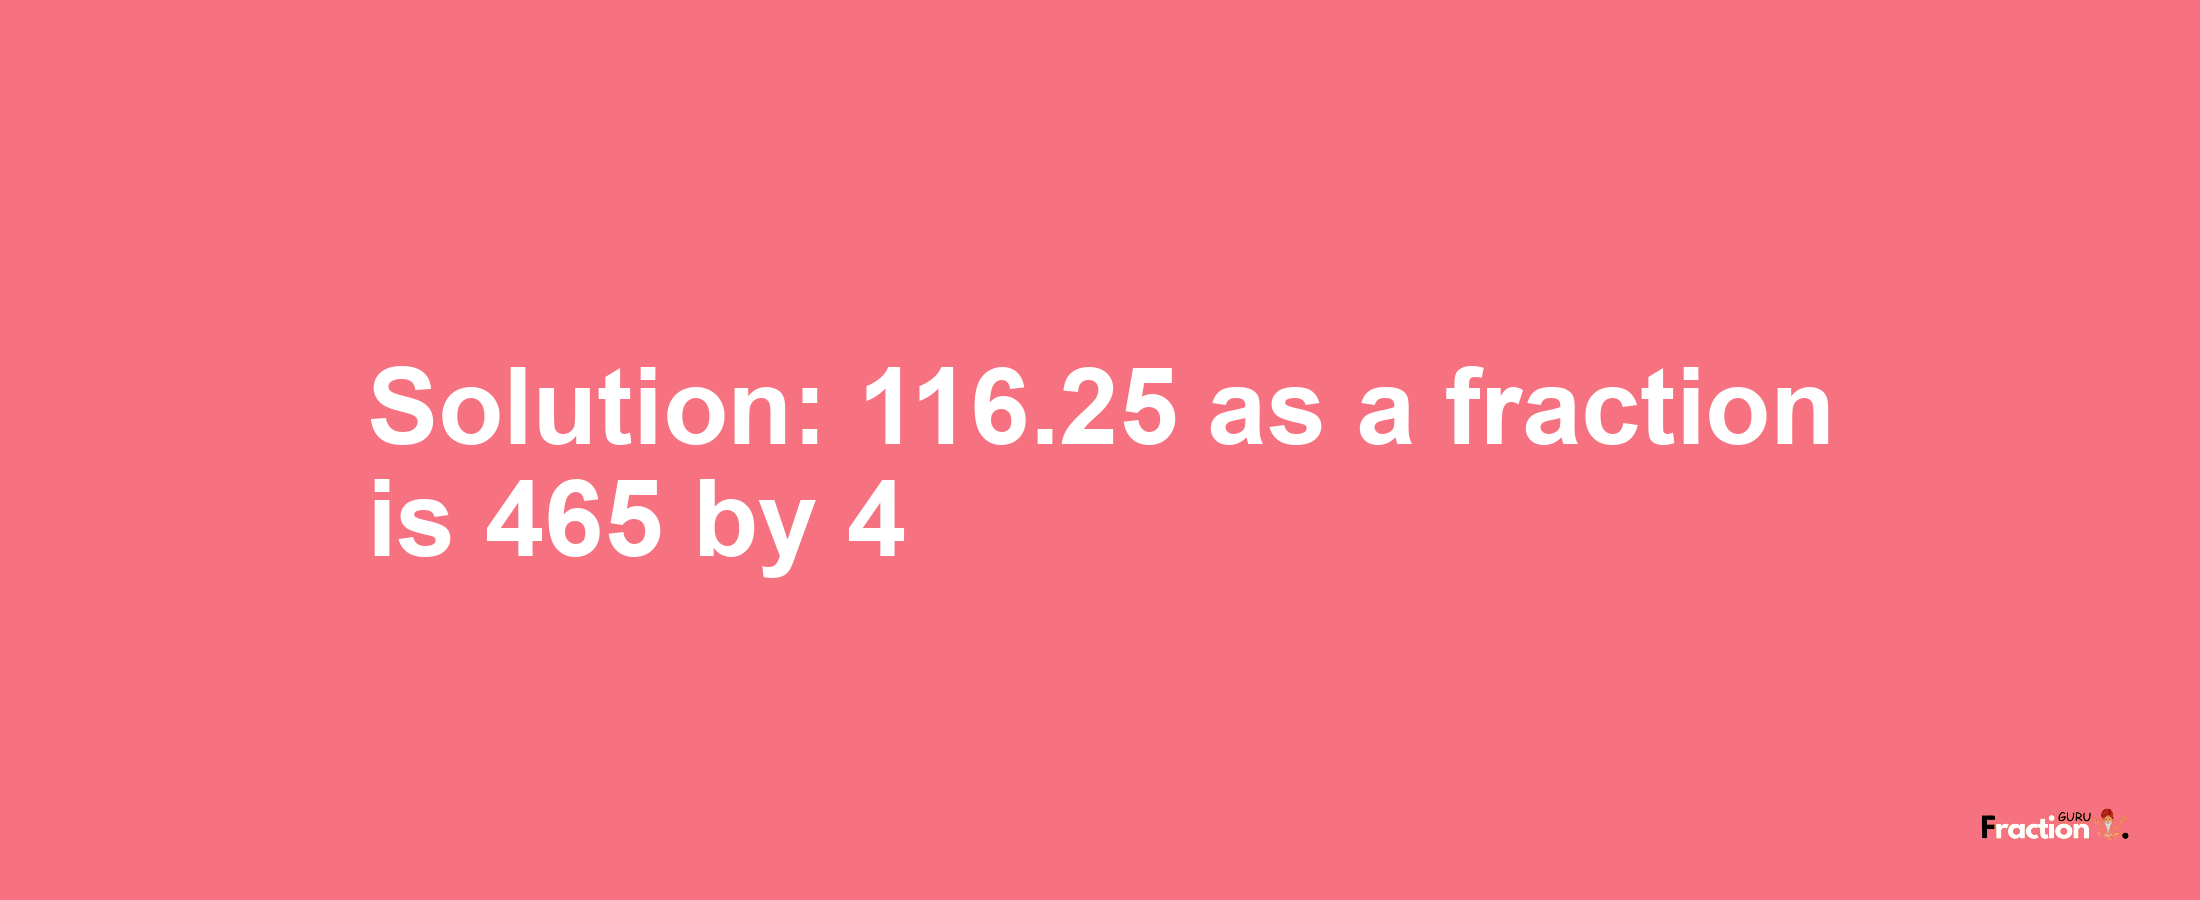 Solution:116.25 as a fraction is 465/4